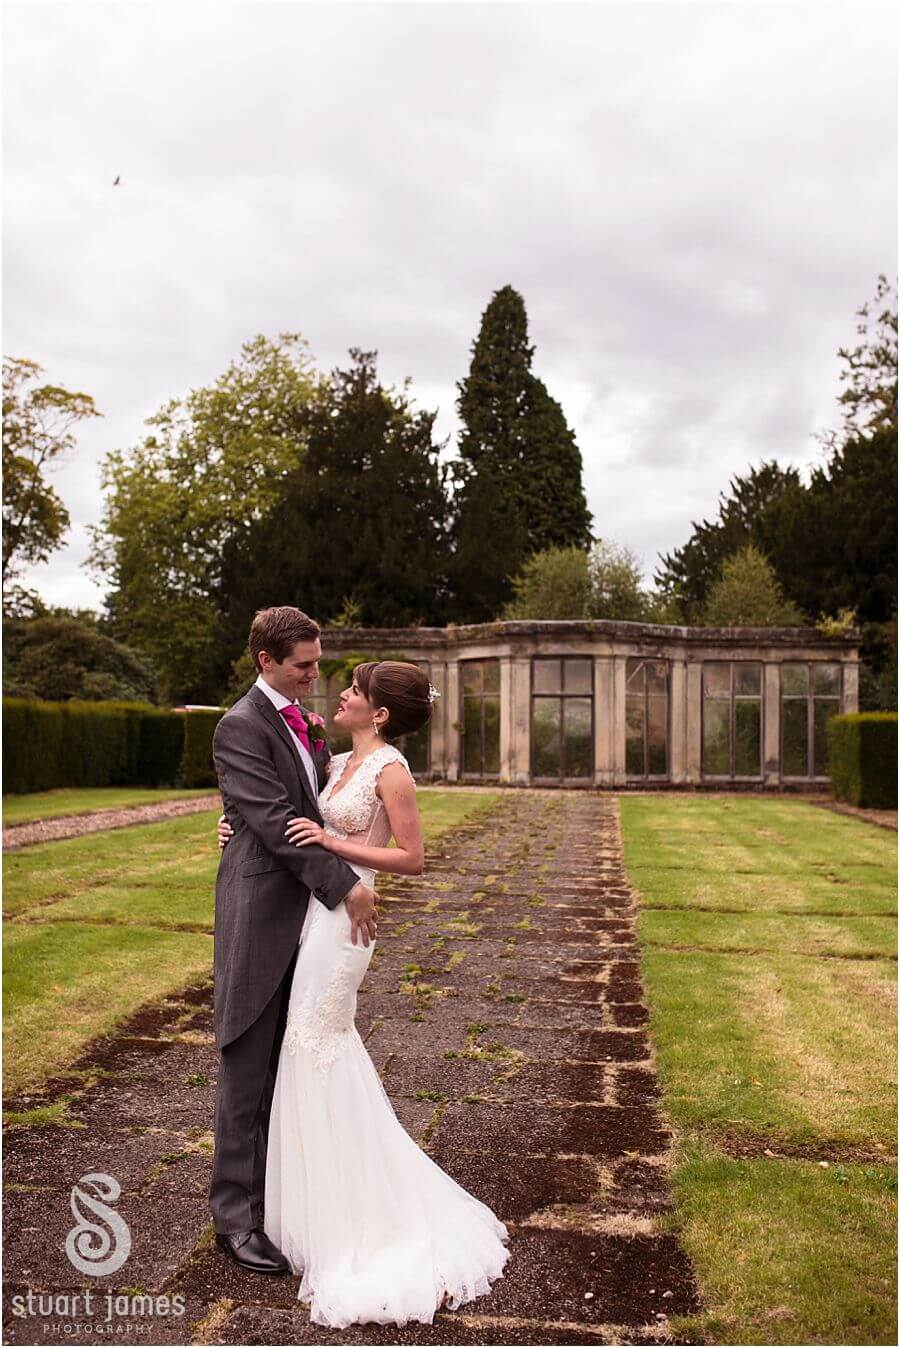 Relaxed beautiful wedding photographs of the Bride and Groom around the grounds at Sandon Hall near Stafford by Stafford Wedding Photographer Stuart James